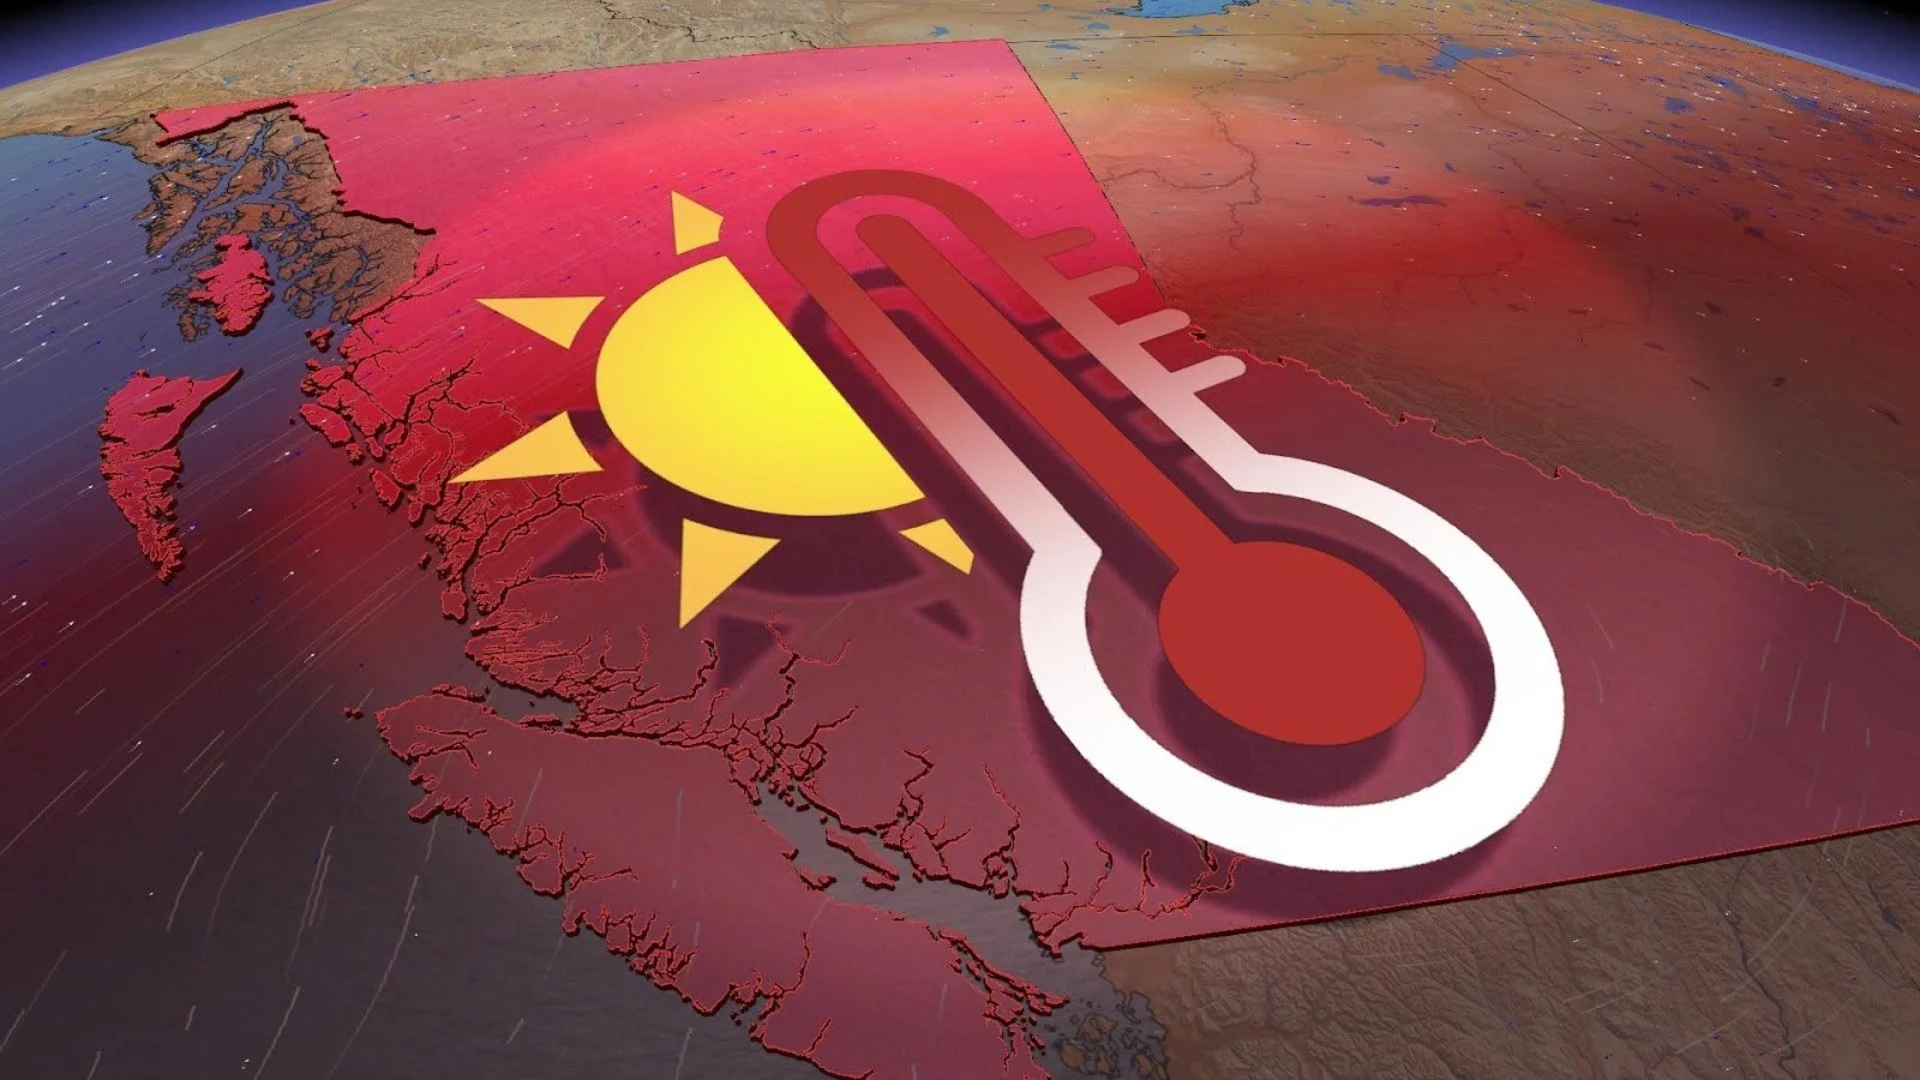 Ready for the heat? B.C. could notch Canada’s first 30-degree reading soon as a potent ridge builds over the West Coast. Details, here